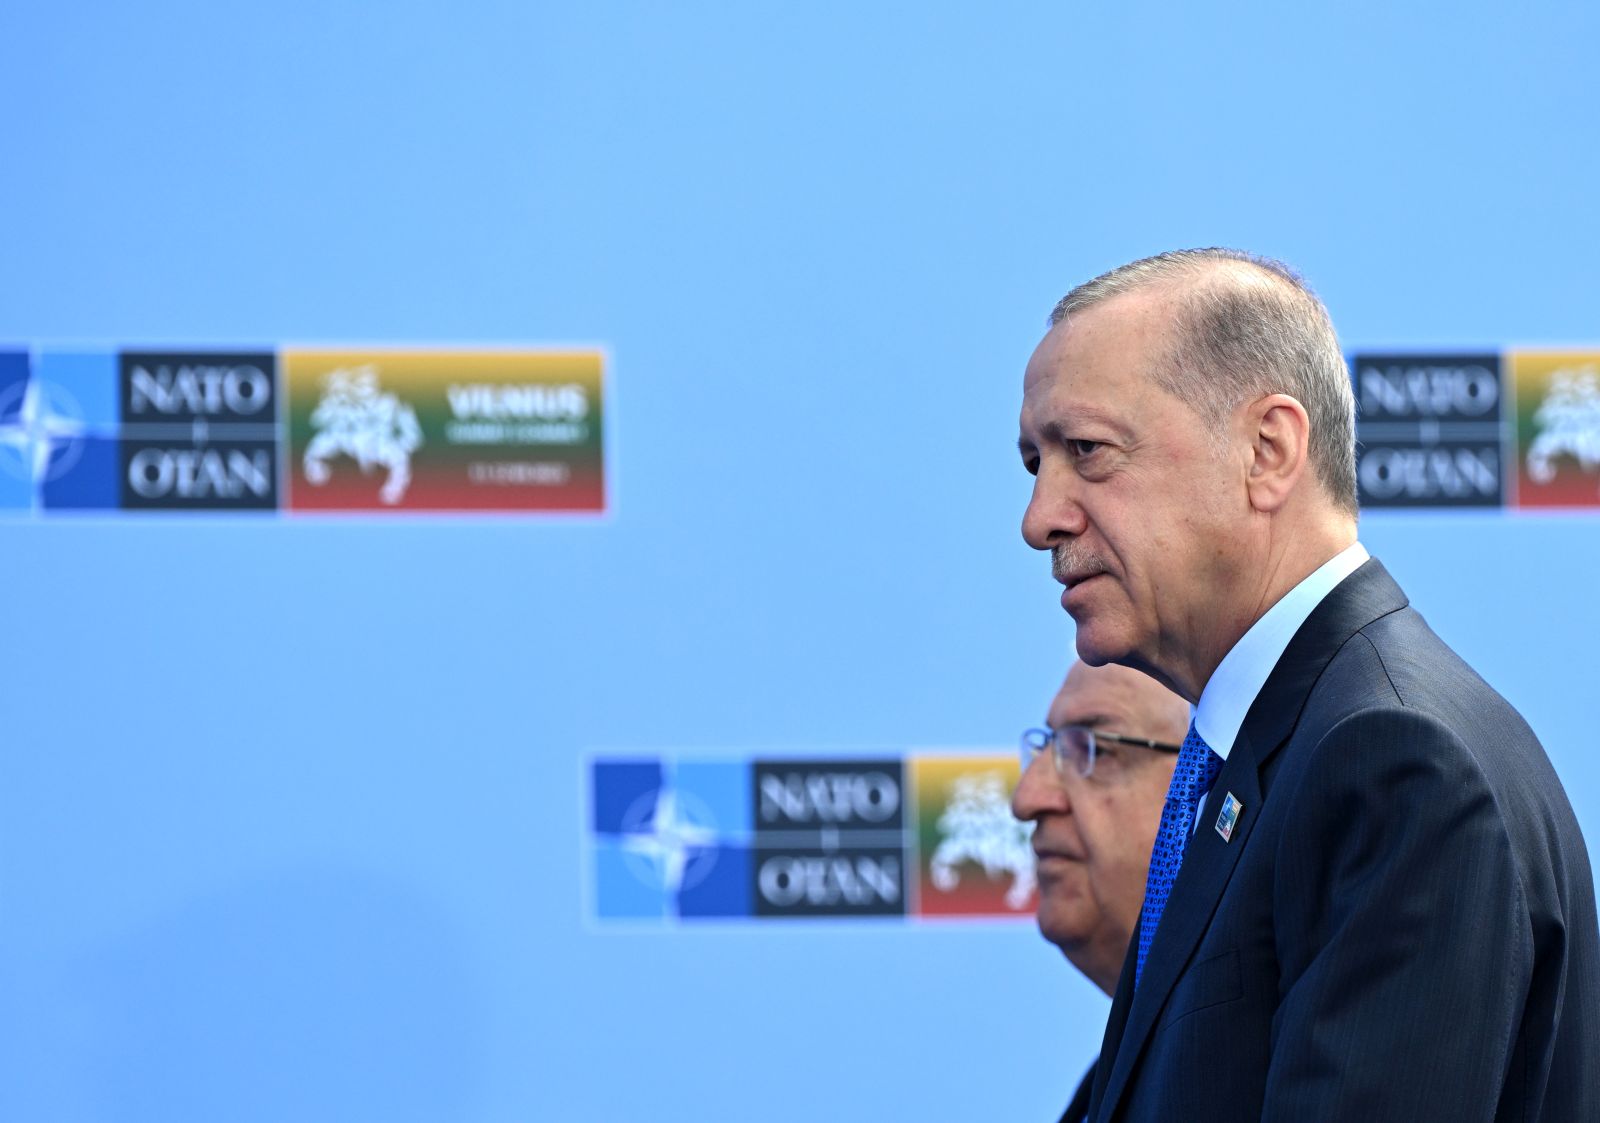 epa10738976 Turkey's President Recep Tayyip Erdogan arrives to attend the NATO summit in Vilnius, Lithuania, 11 July 2023. The North Atlantic Treaty Organization (NATO) Summit will take place in Vilnius on 11 and 12 July 2023 with the alliance's leaders expected to adopt new defense plans.  EPA/FILIP SINGER